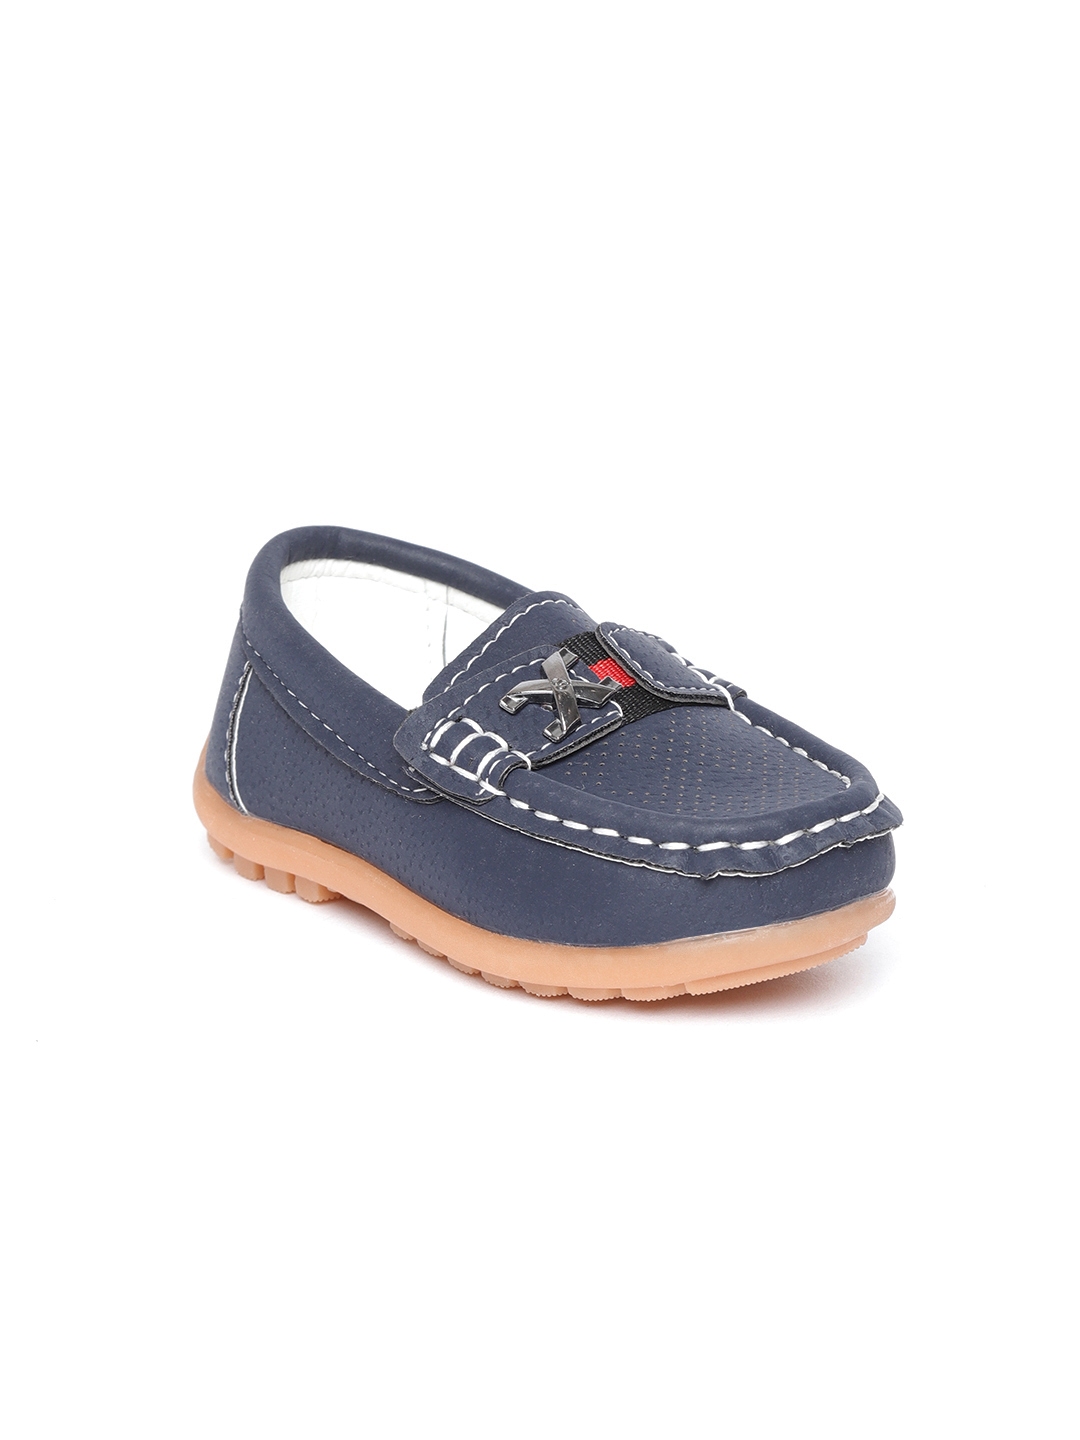 baby boy blue loafers